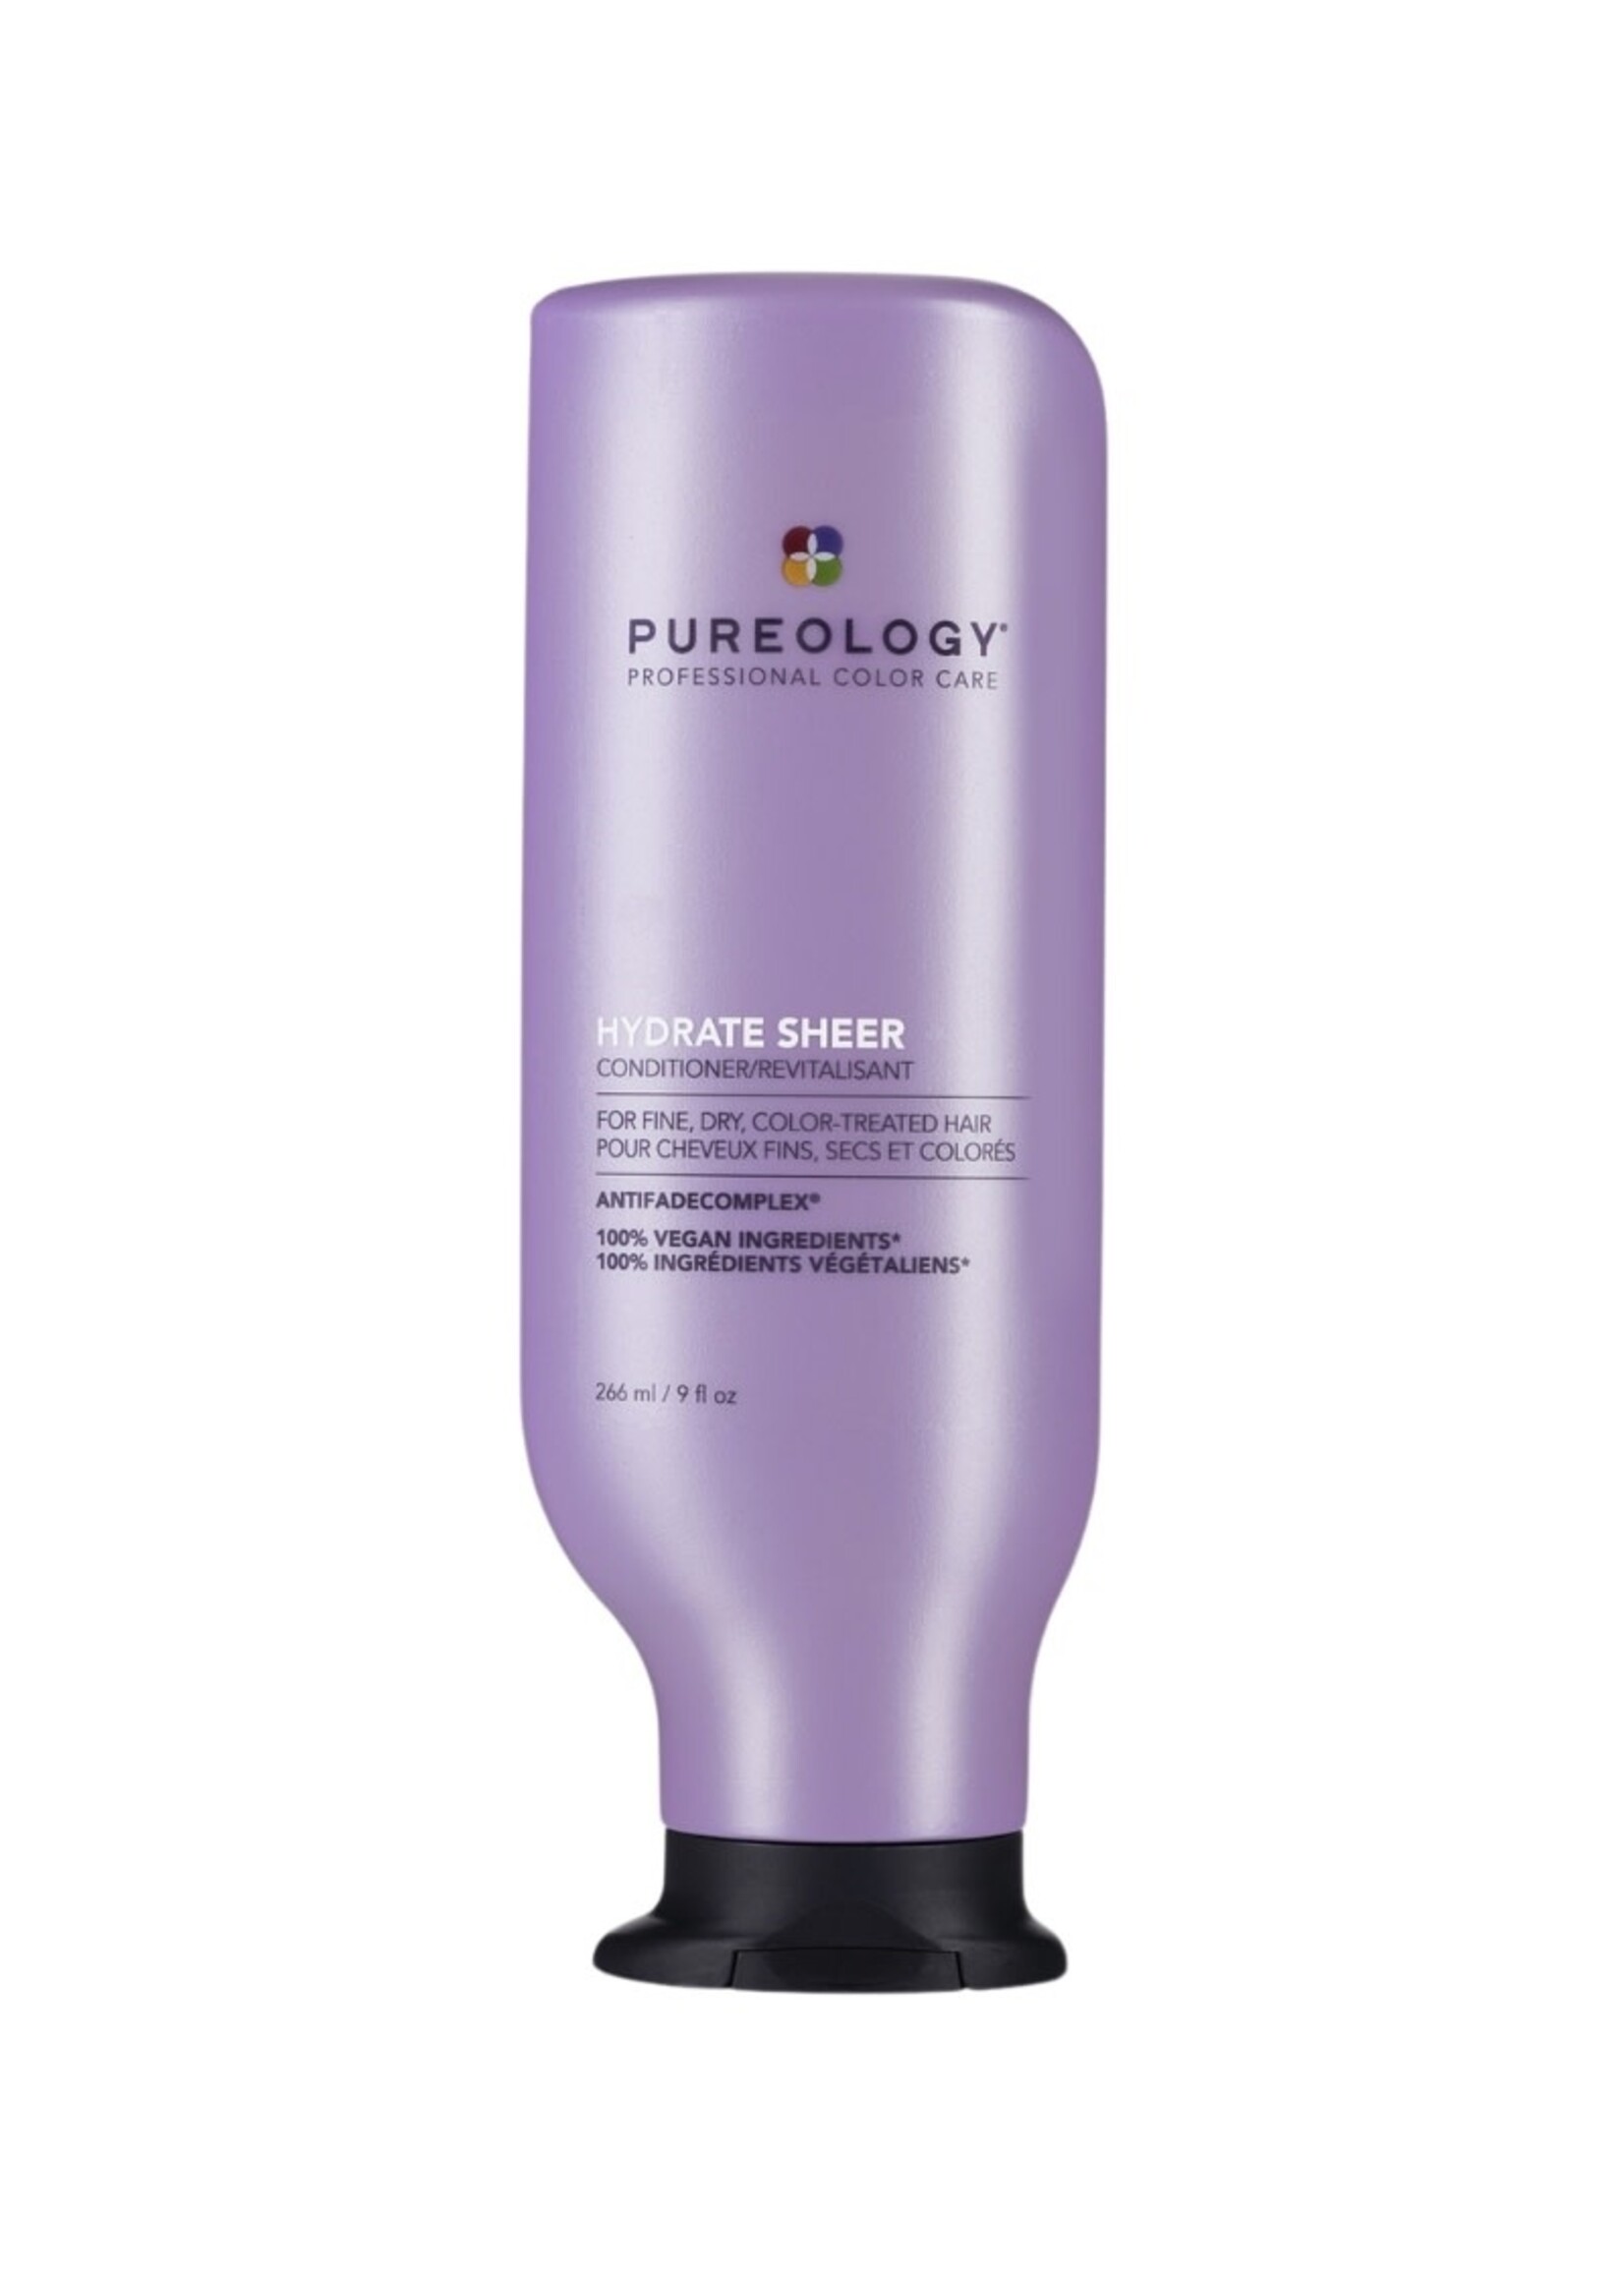 Pureology Pureology Hydrate Sheer Conditioner 266ml